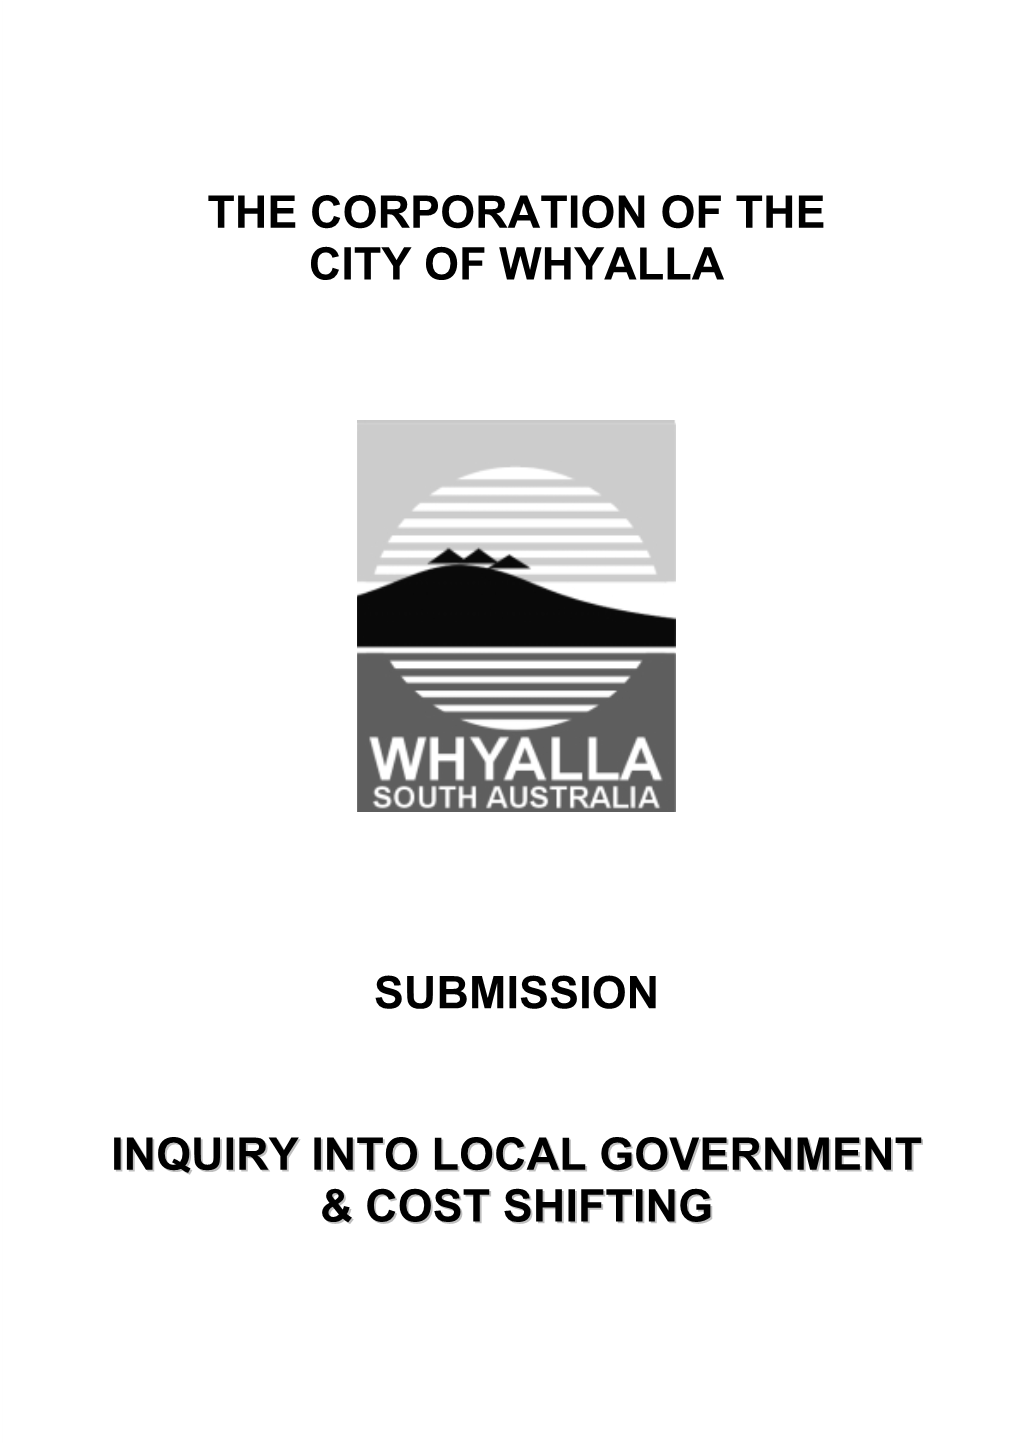 The Corporation of the City of Whyalla Submission